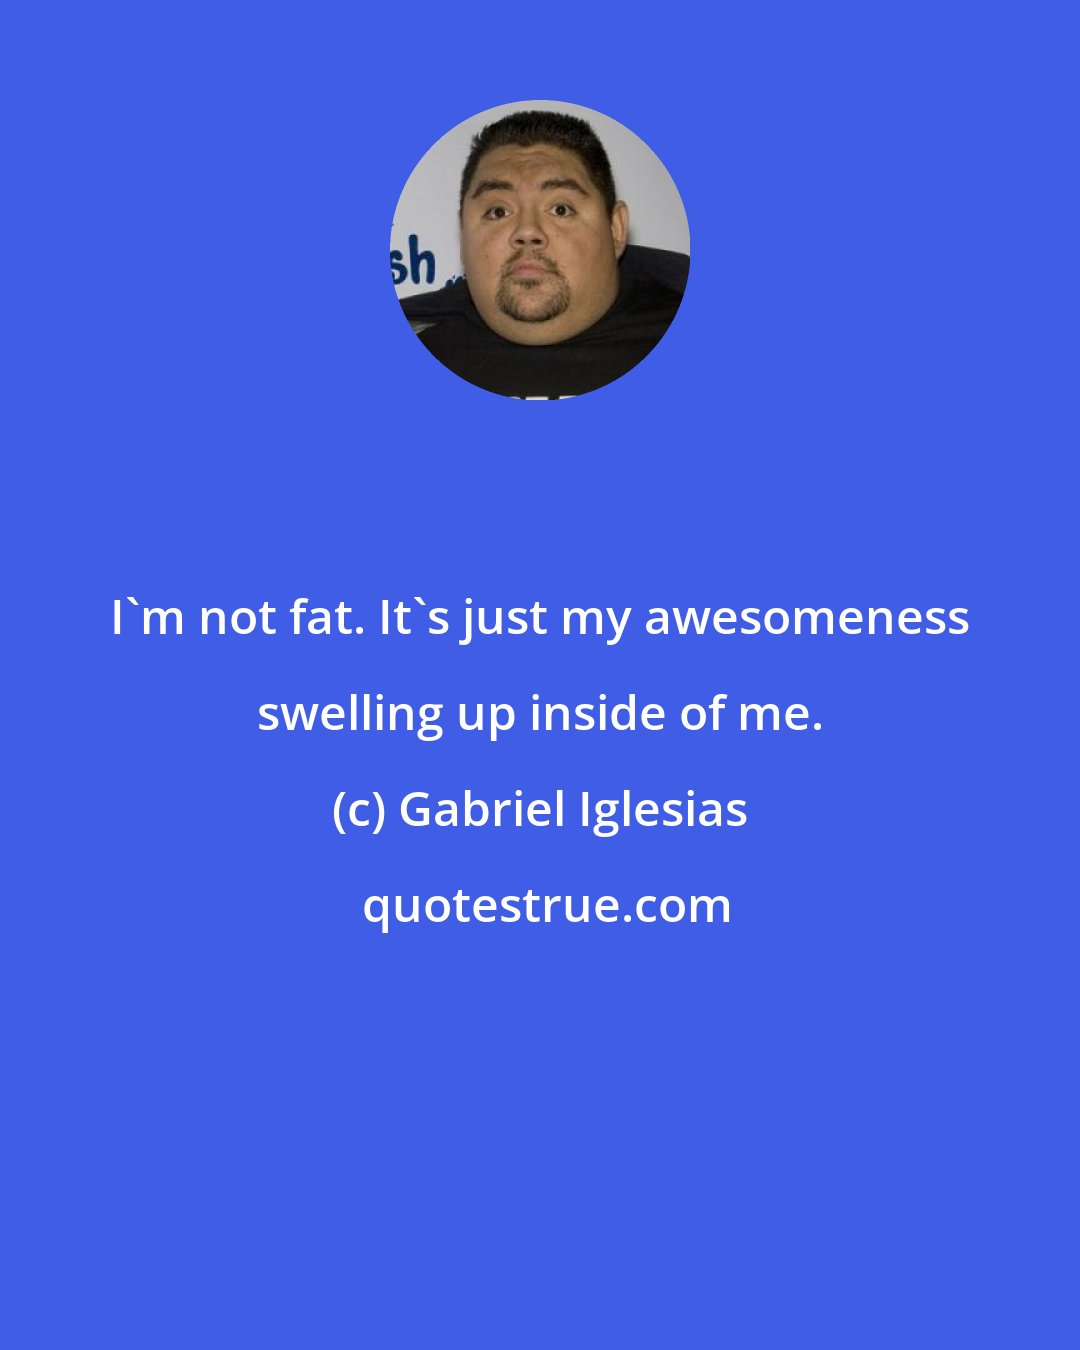 Gabriel Iglesias: I'm not fat. It's just my awesomeness swelling up inside of me.